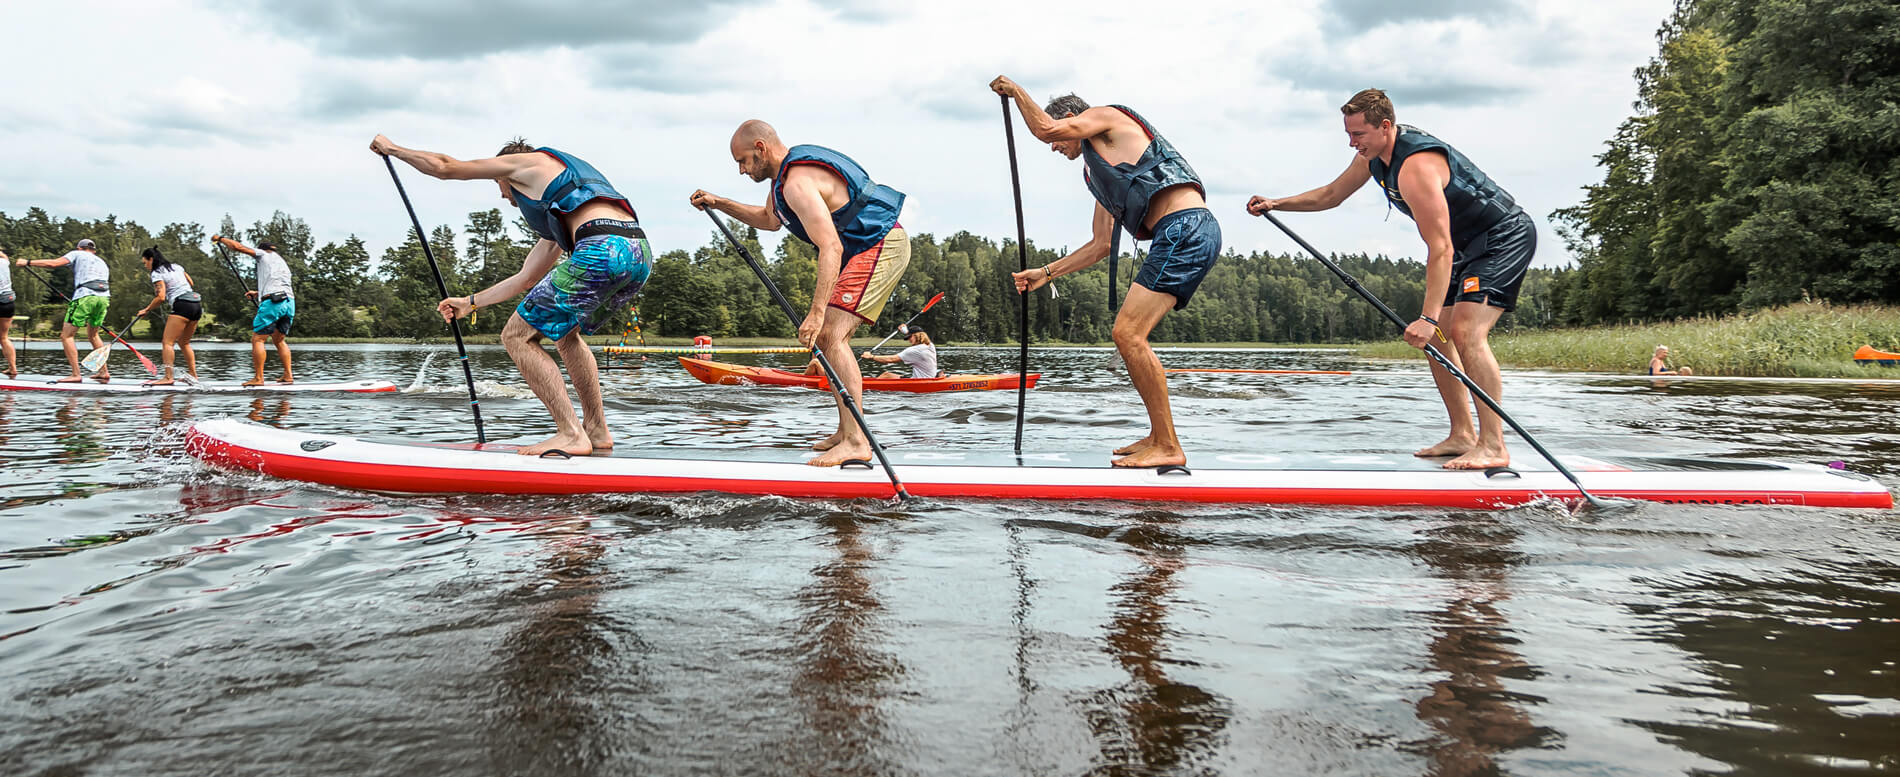 6-facts-you-must-know-about-stand-up-paddleboard-racing